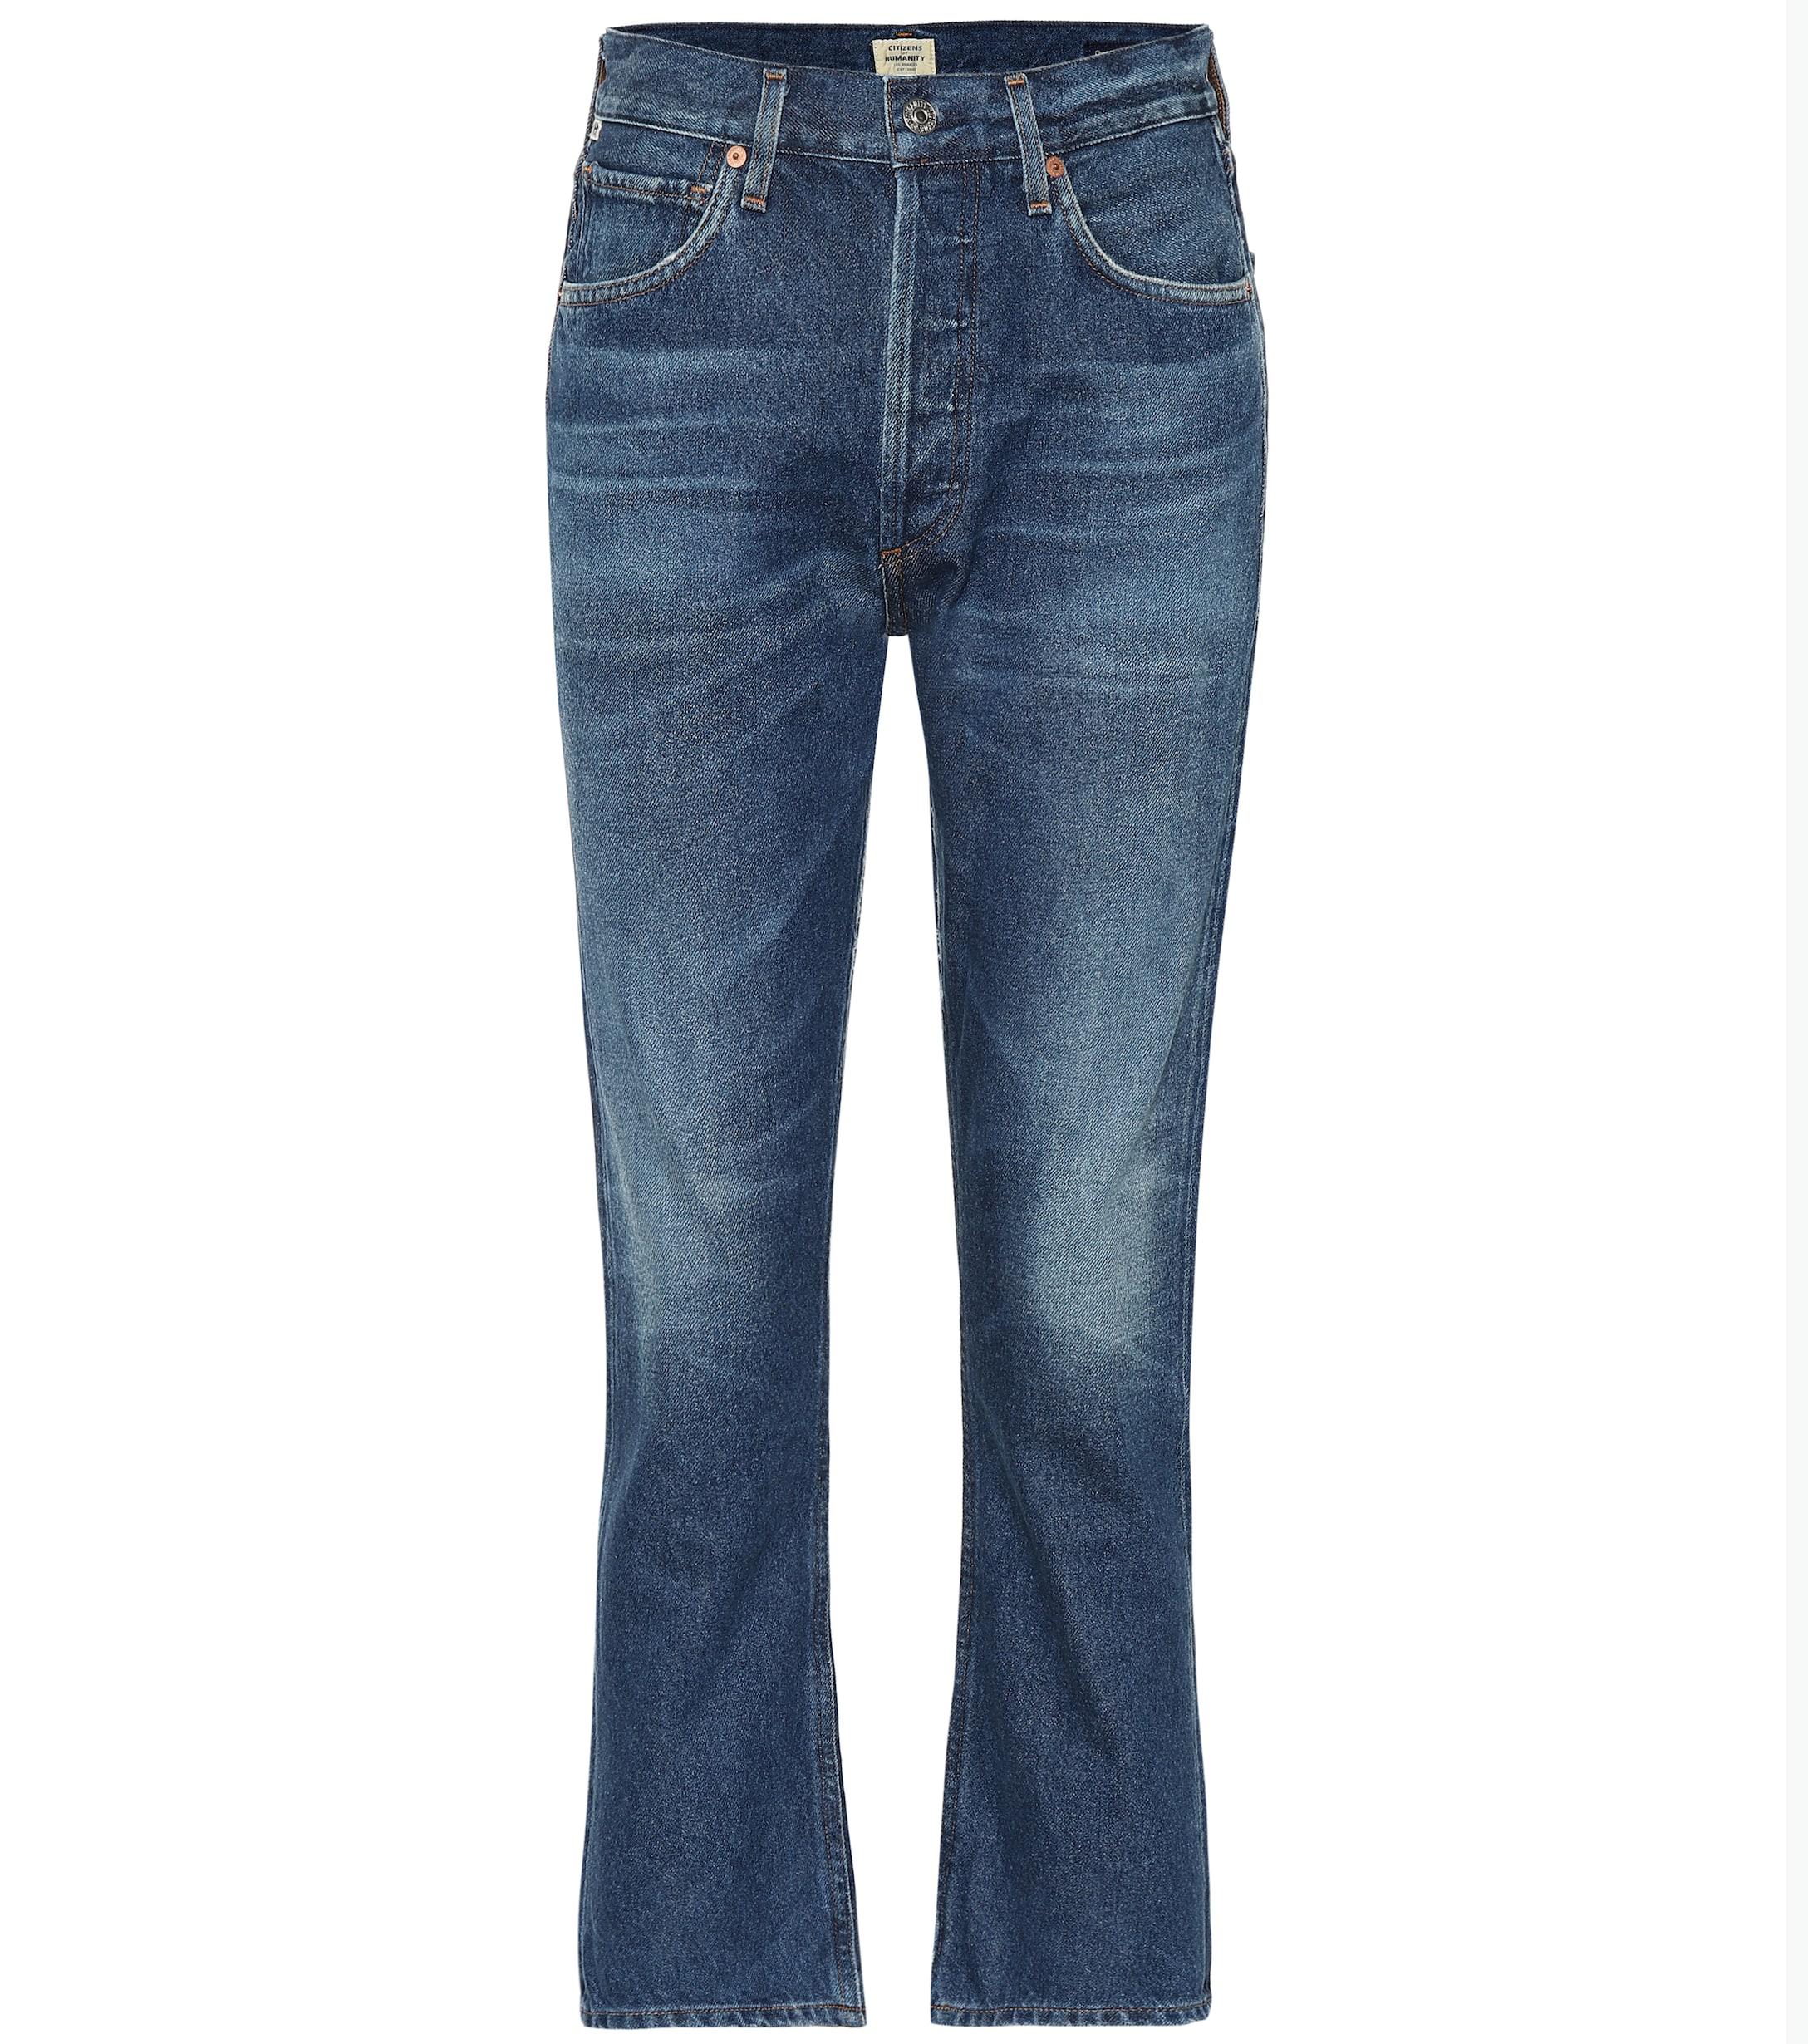 Lyst - Citizens of Humanity Charlotte Cropped High-rise Jeans in Blue